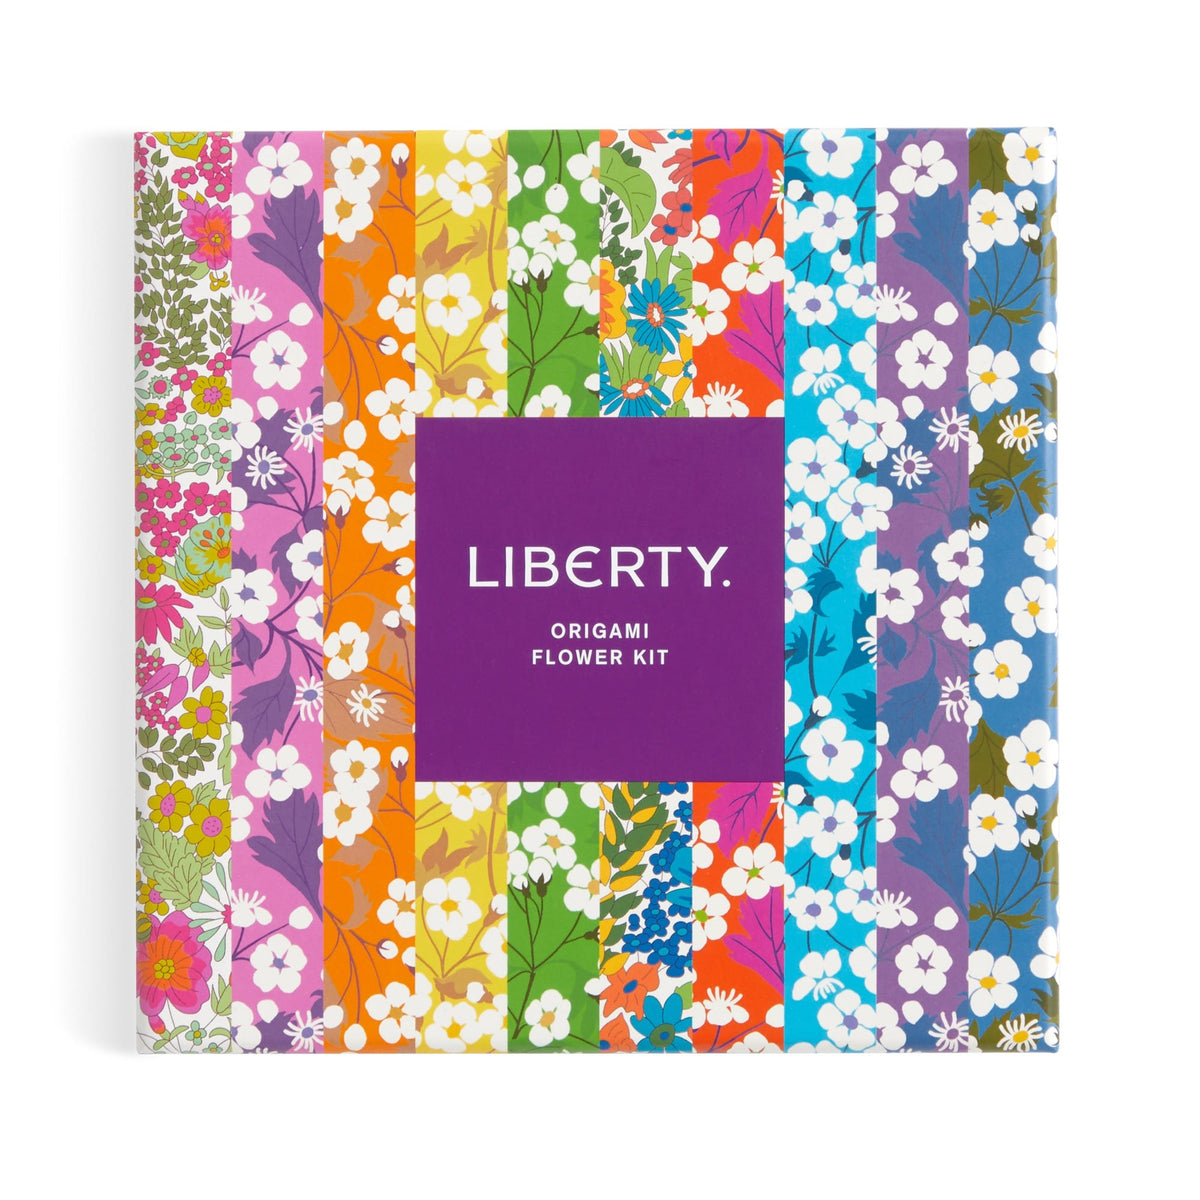 Liberty Classic Floral Origami Flower Kit - SFMOMA Museum Store